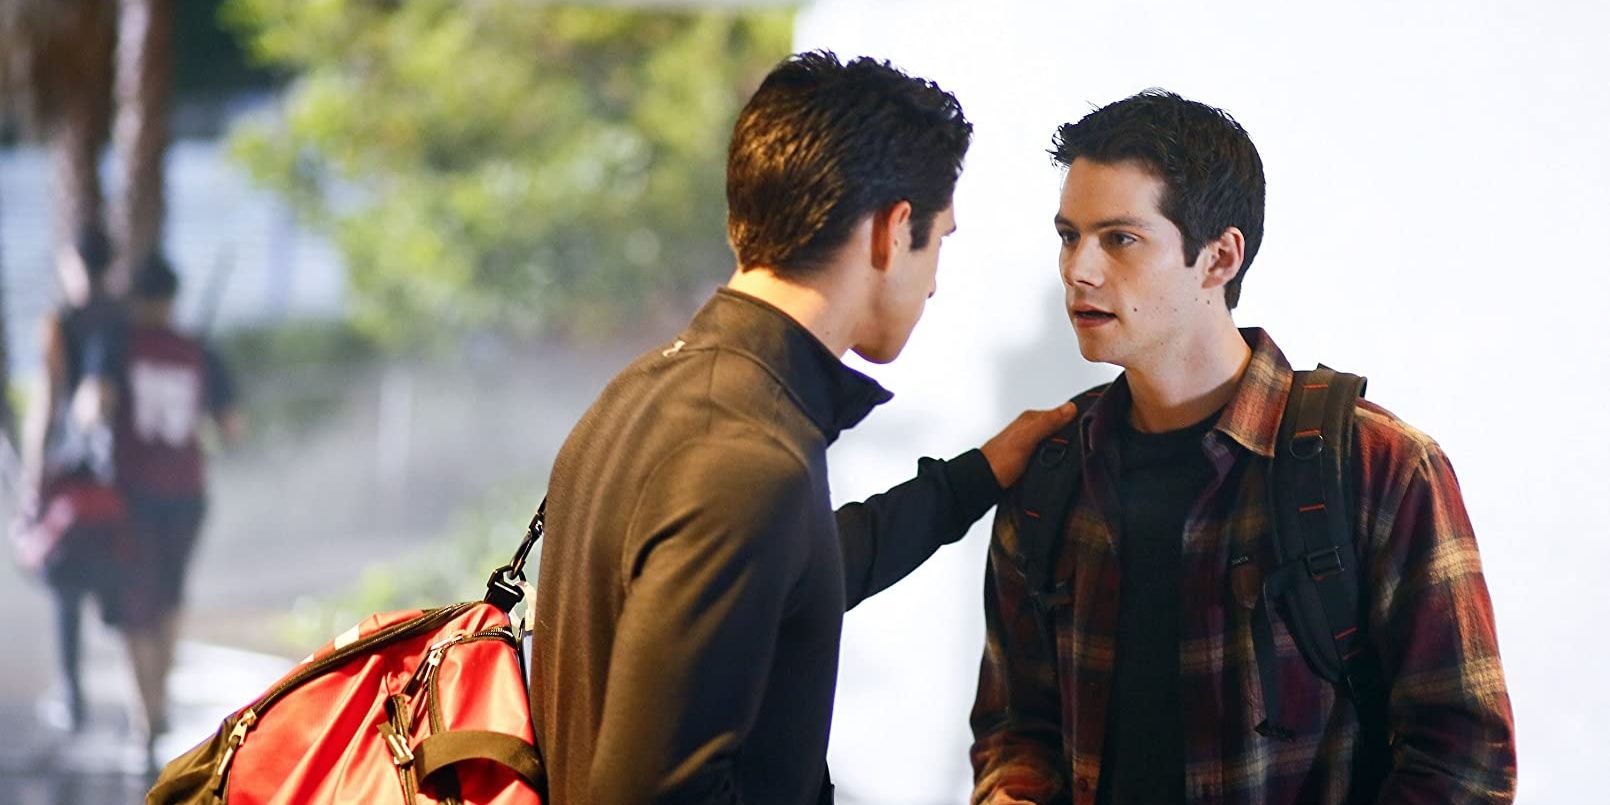 Teen Wolf The 10 Worst Things Scott & Stiles Did To Each Other Ranked